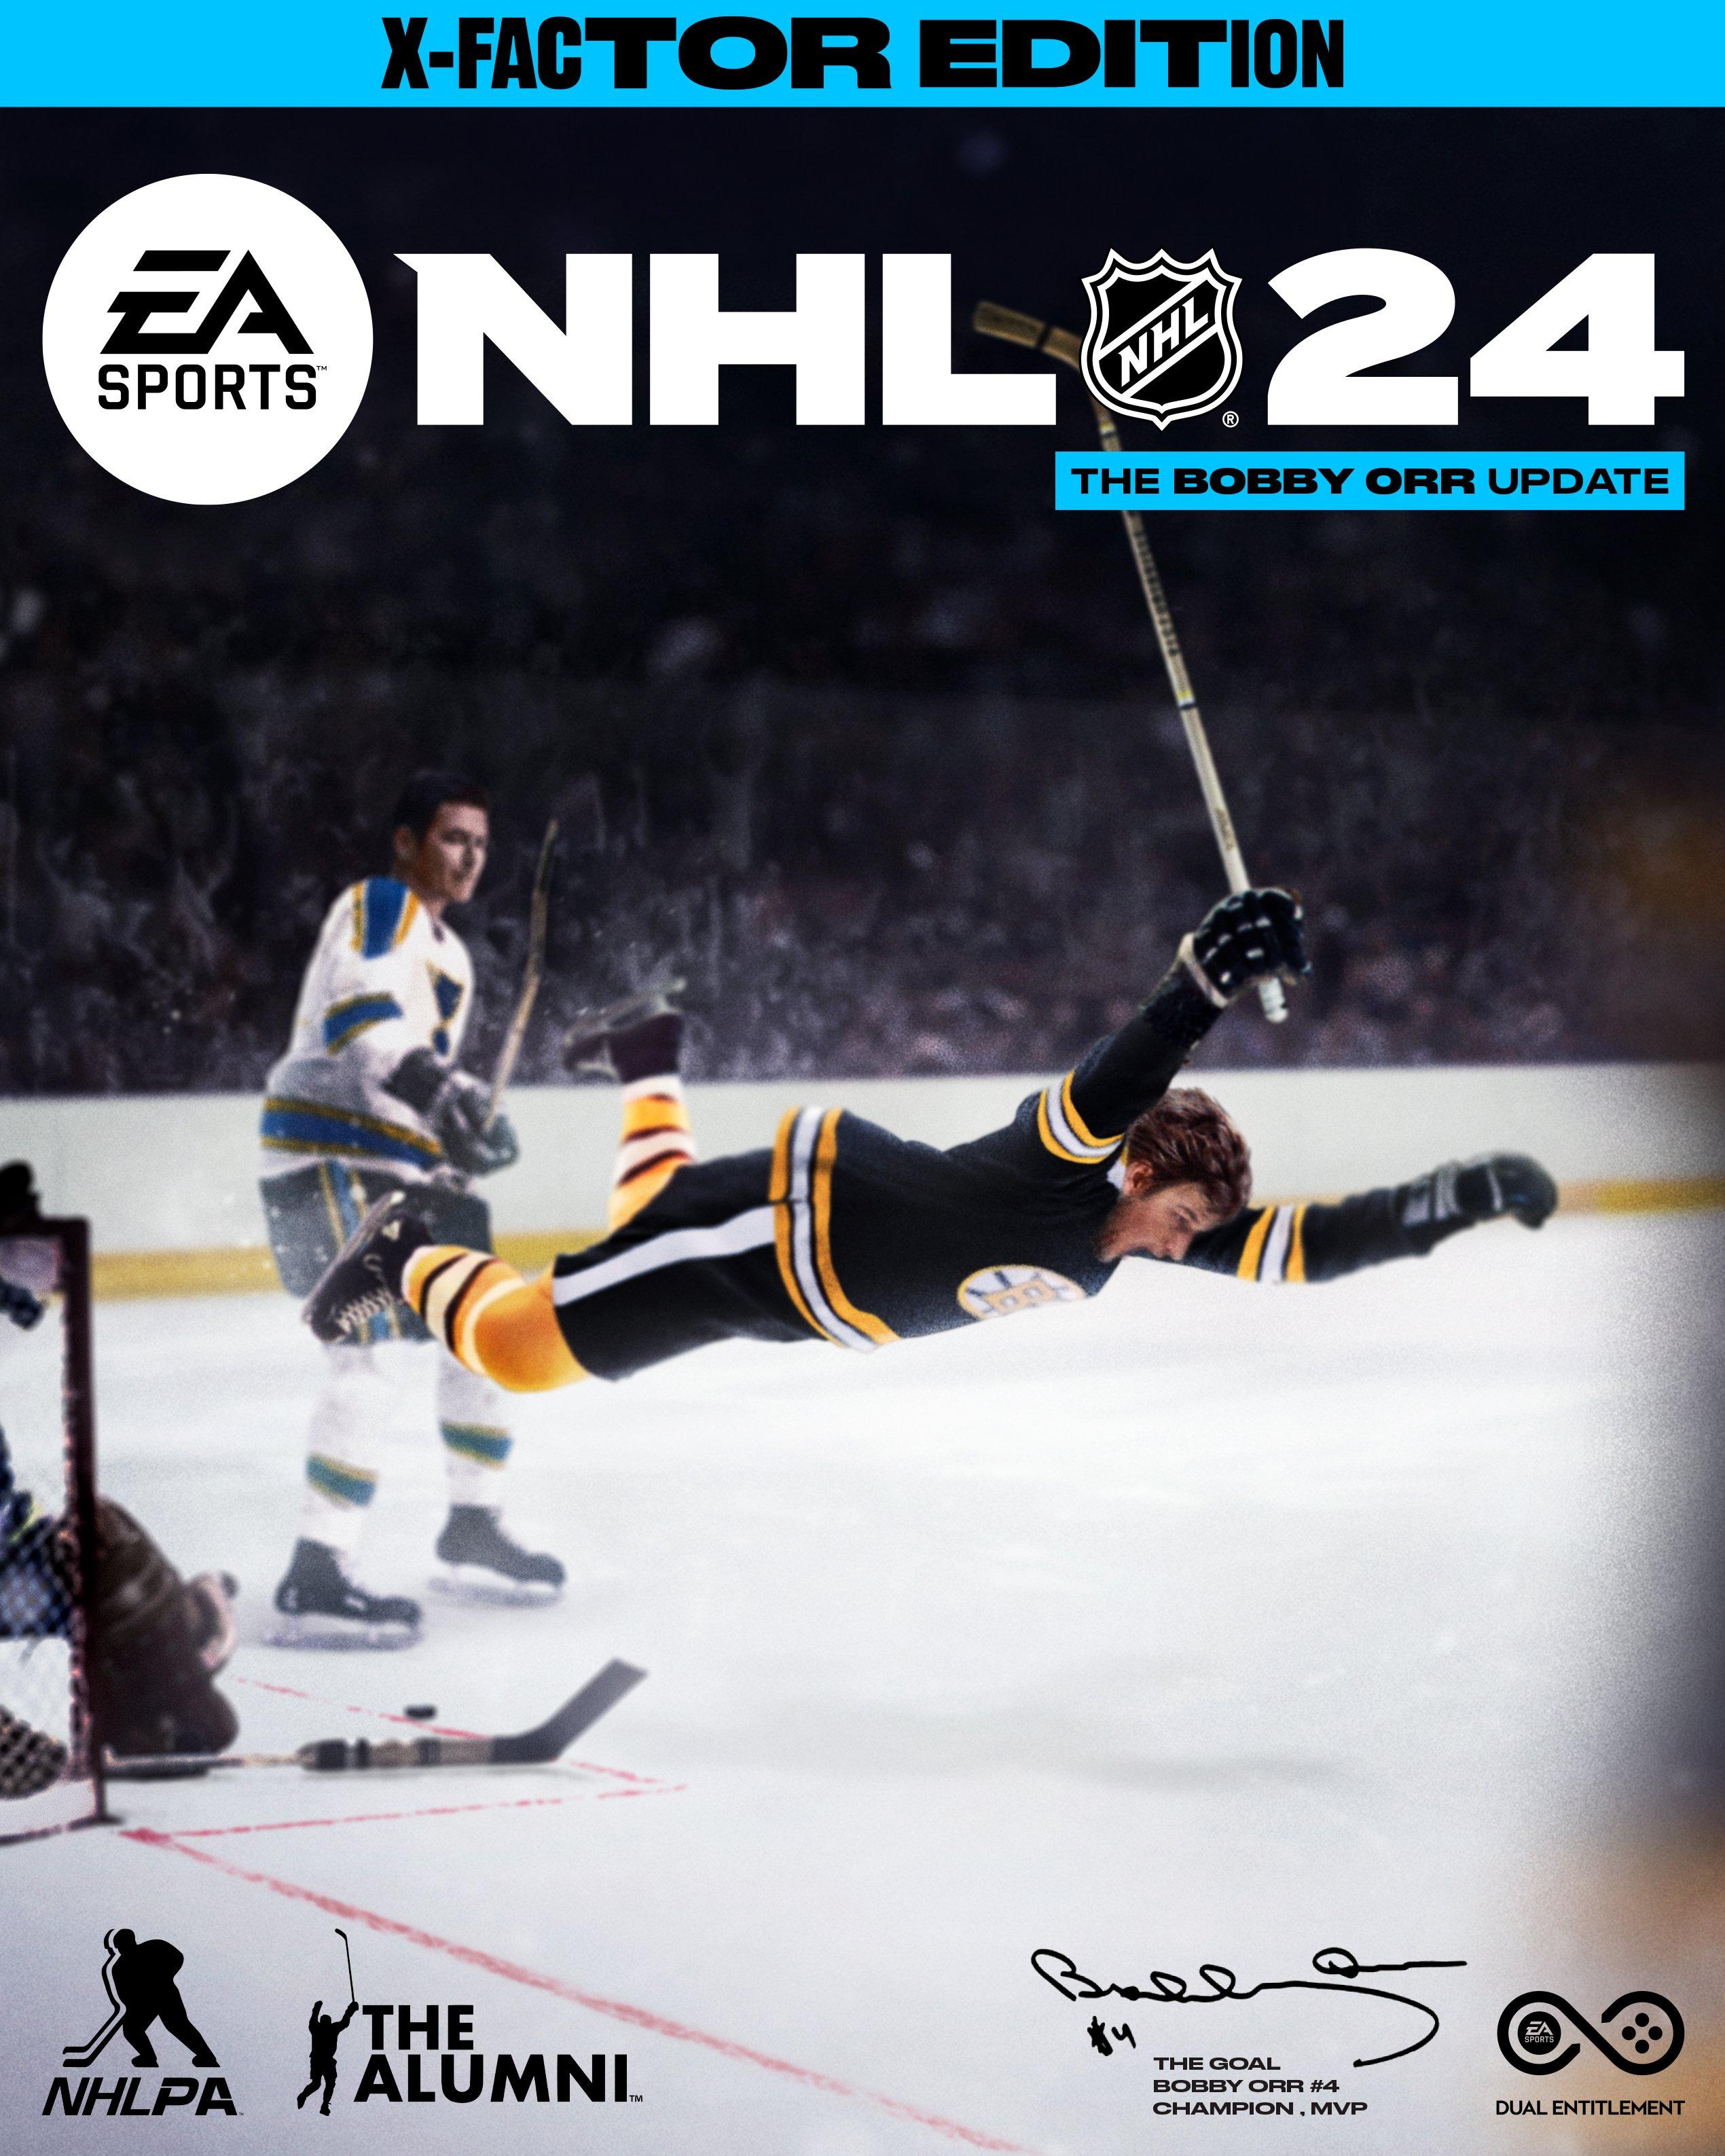 NHL 22 release date, cost, player ratings, new features, editions